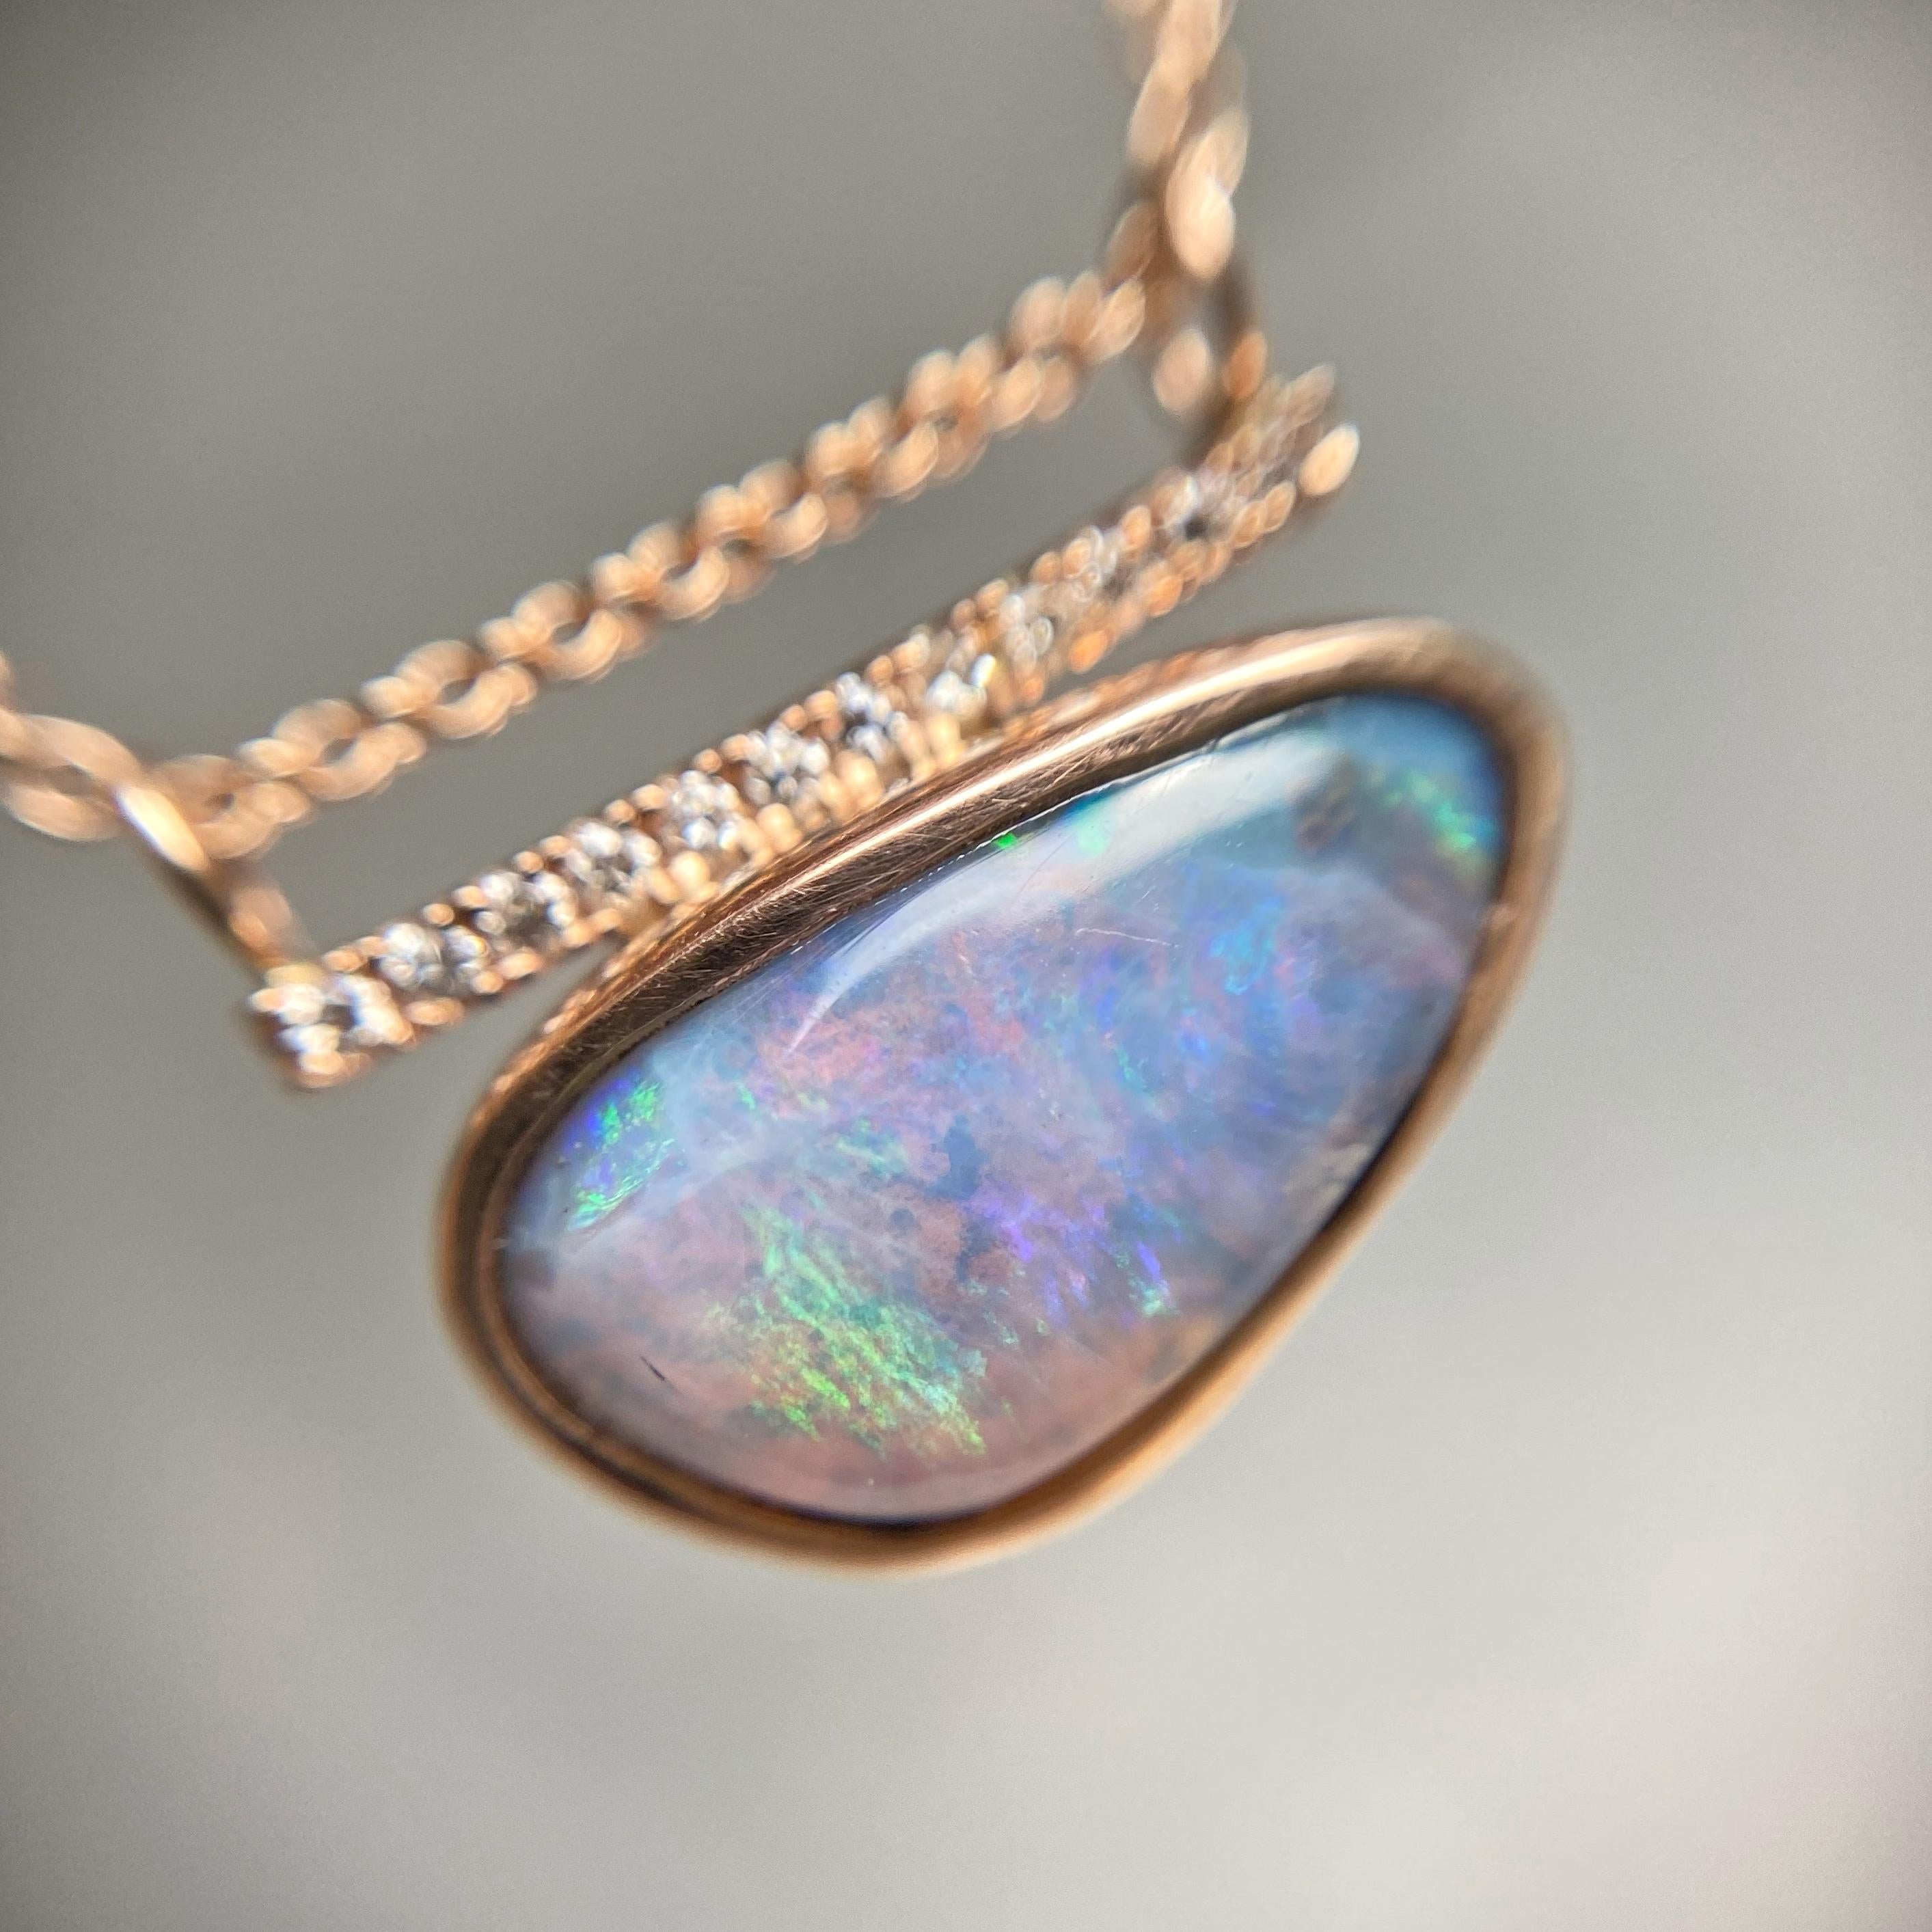 Women's Head in the Clouds Rose Gold Opal Necklace No. 15 with Diamonds by NIXIN Jewelry For Sale